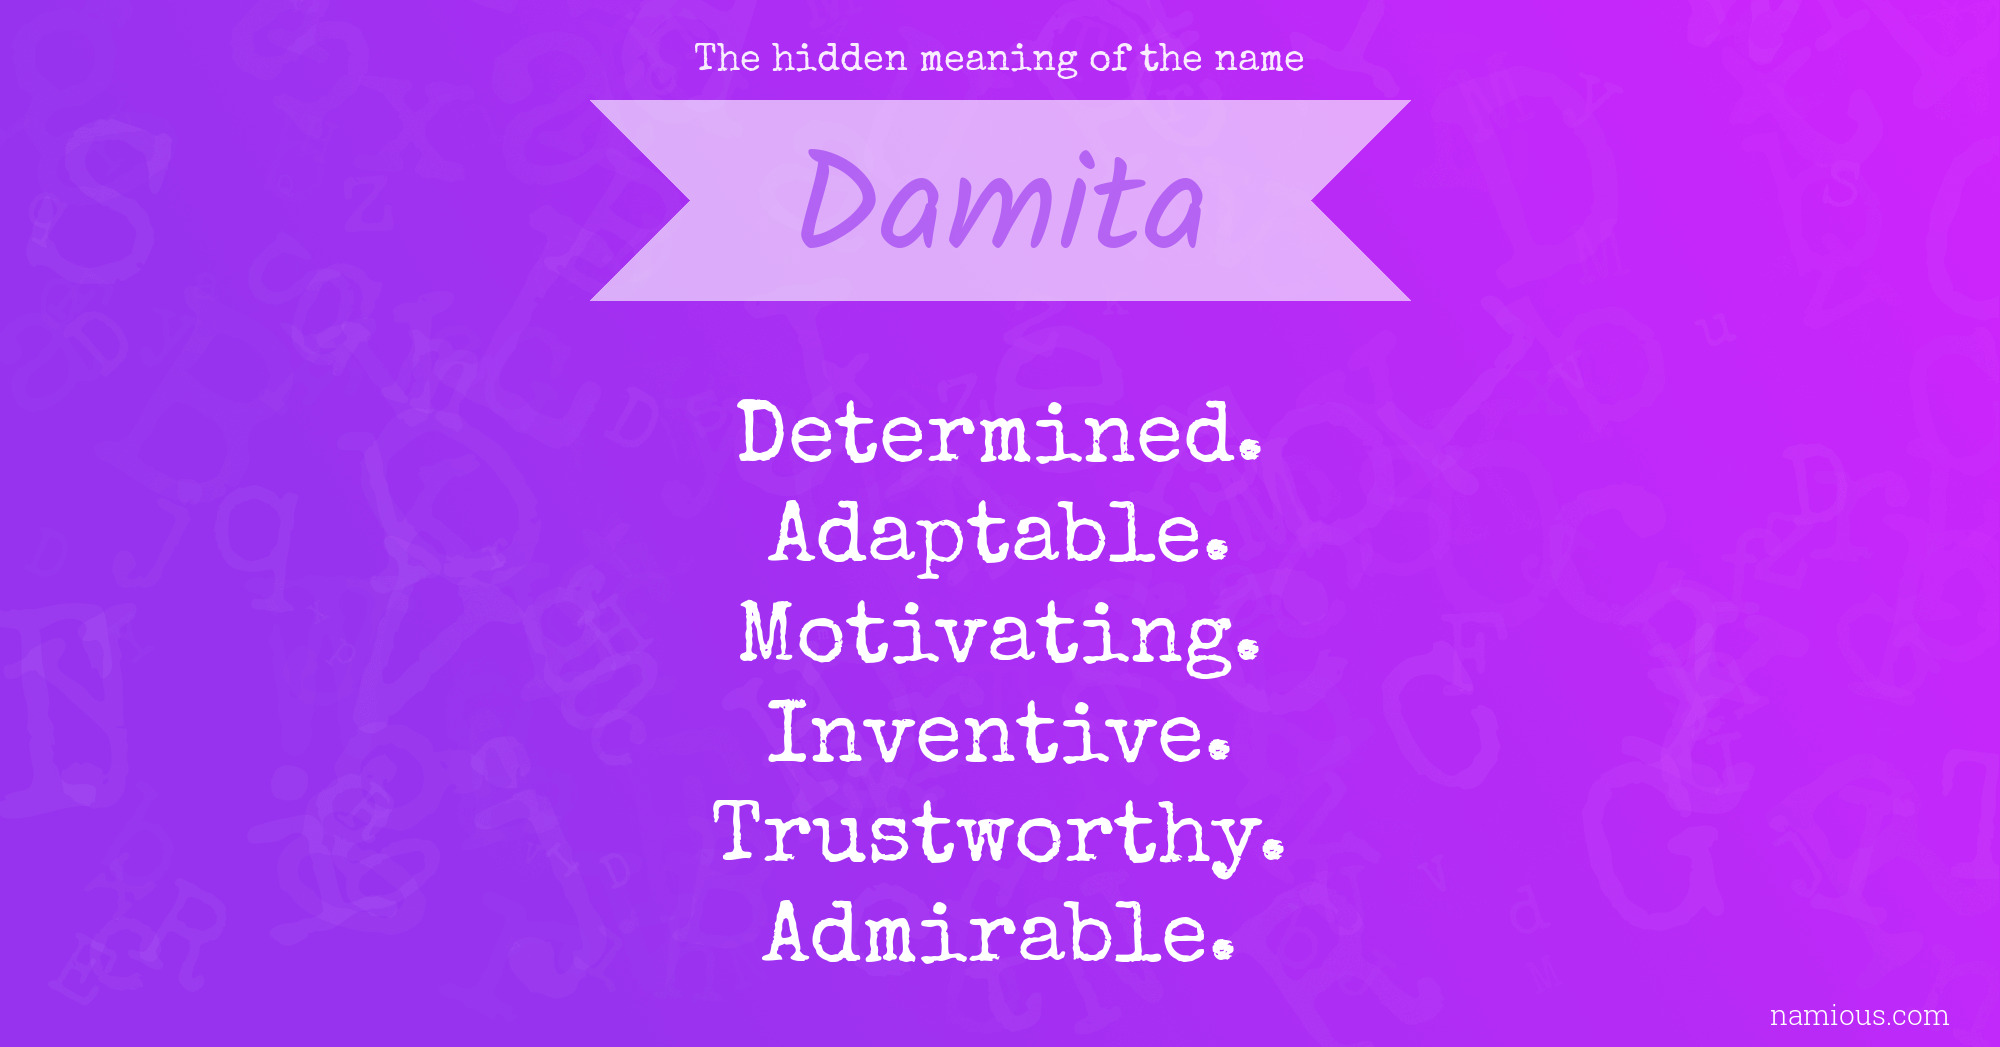 The hidden meaning of the name Damita